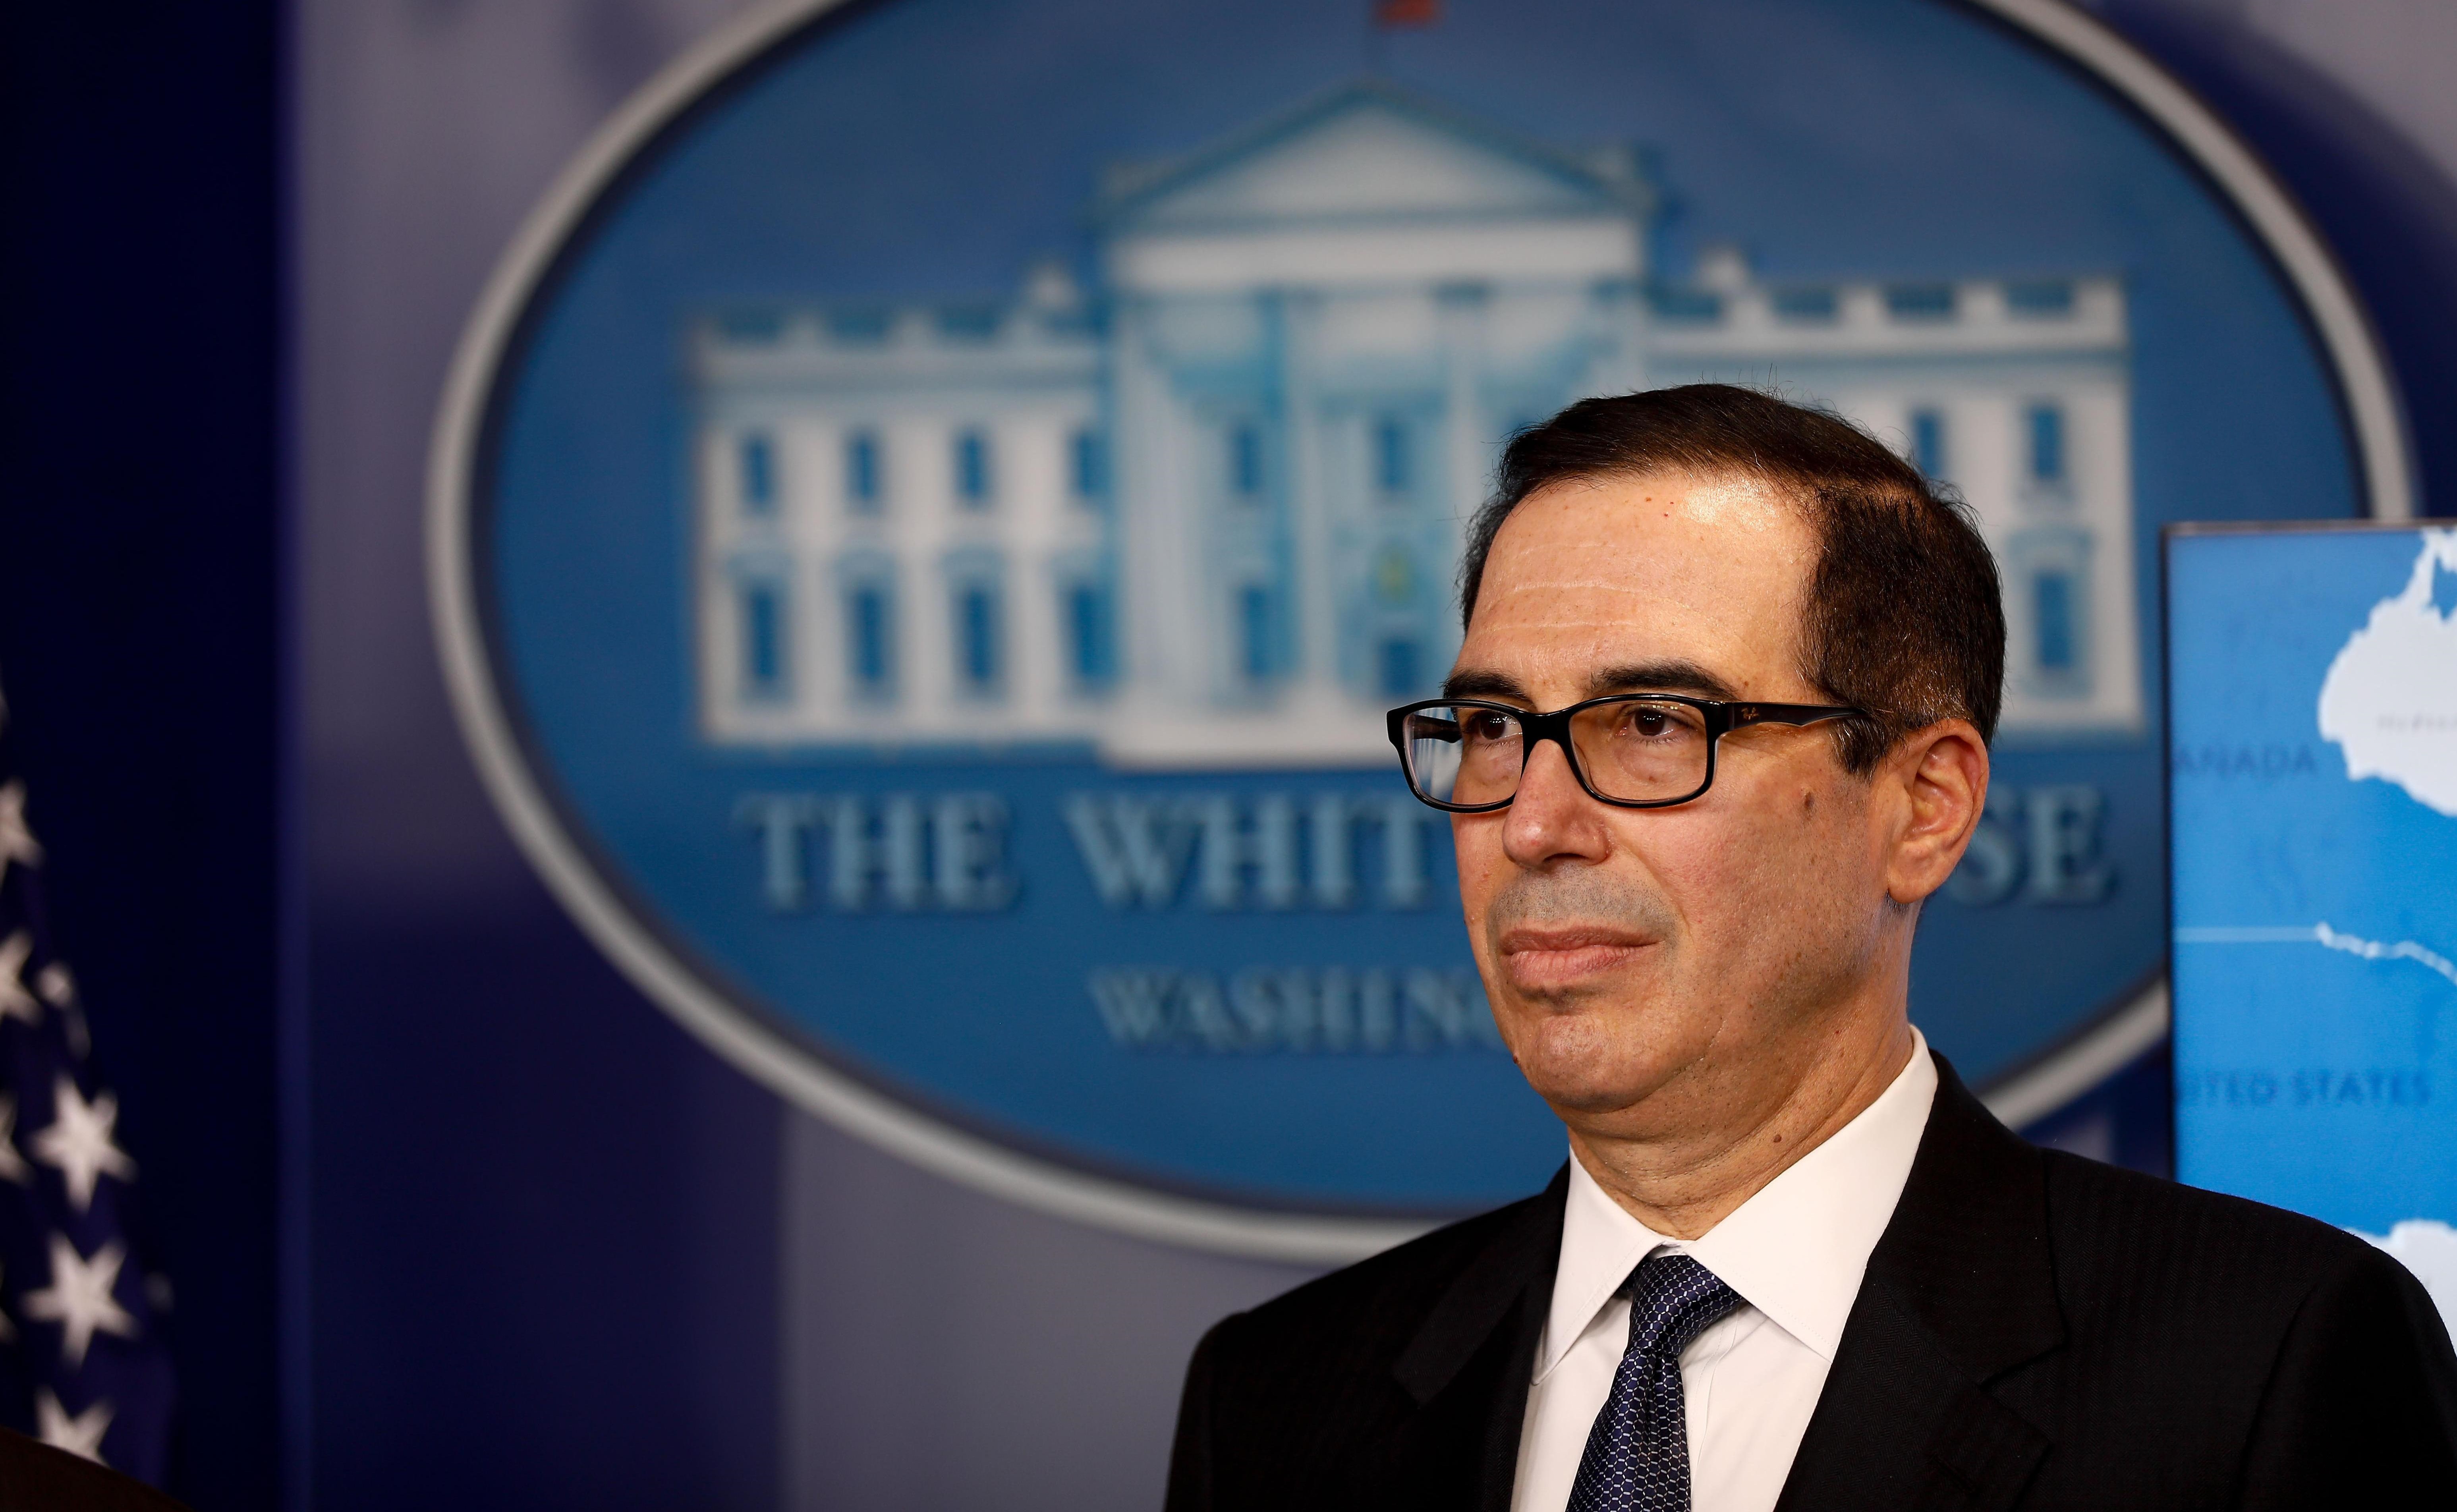 U.S. Treasury chief says aiming for details of mid-size company loans this week